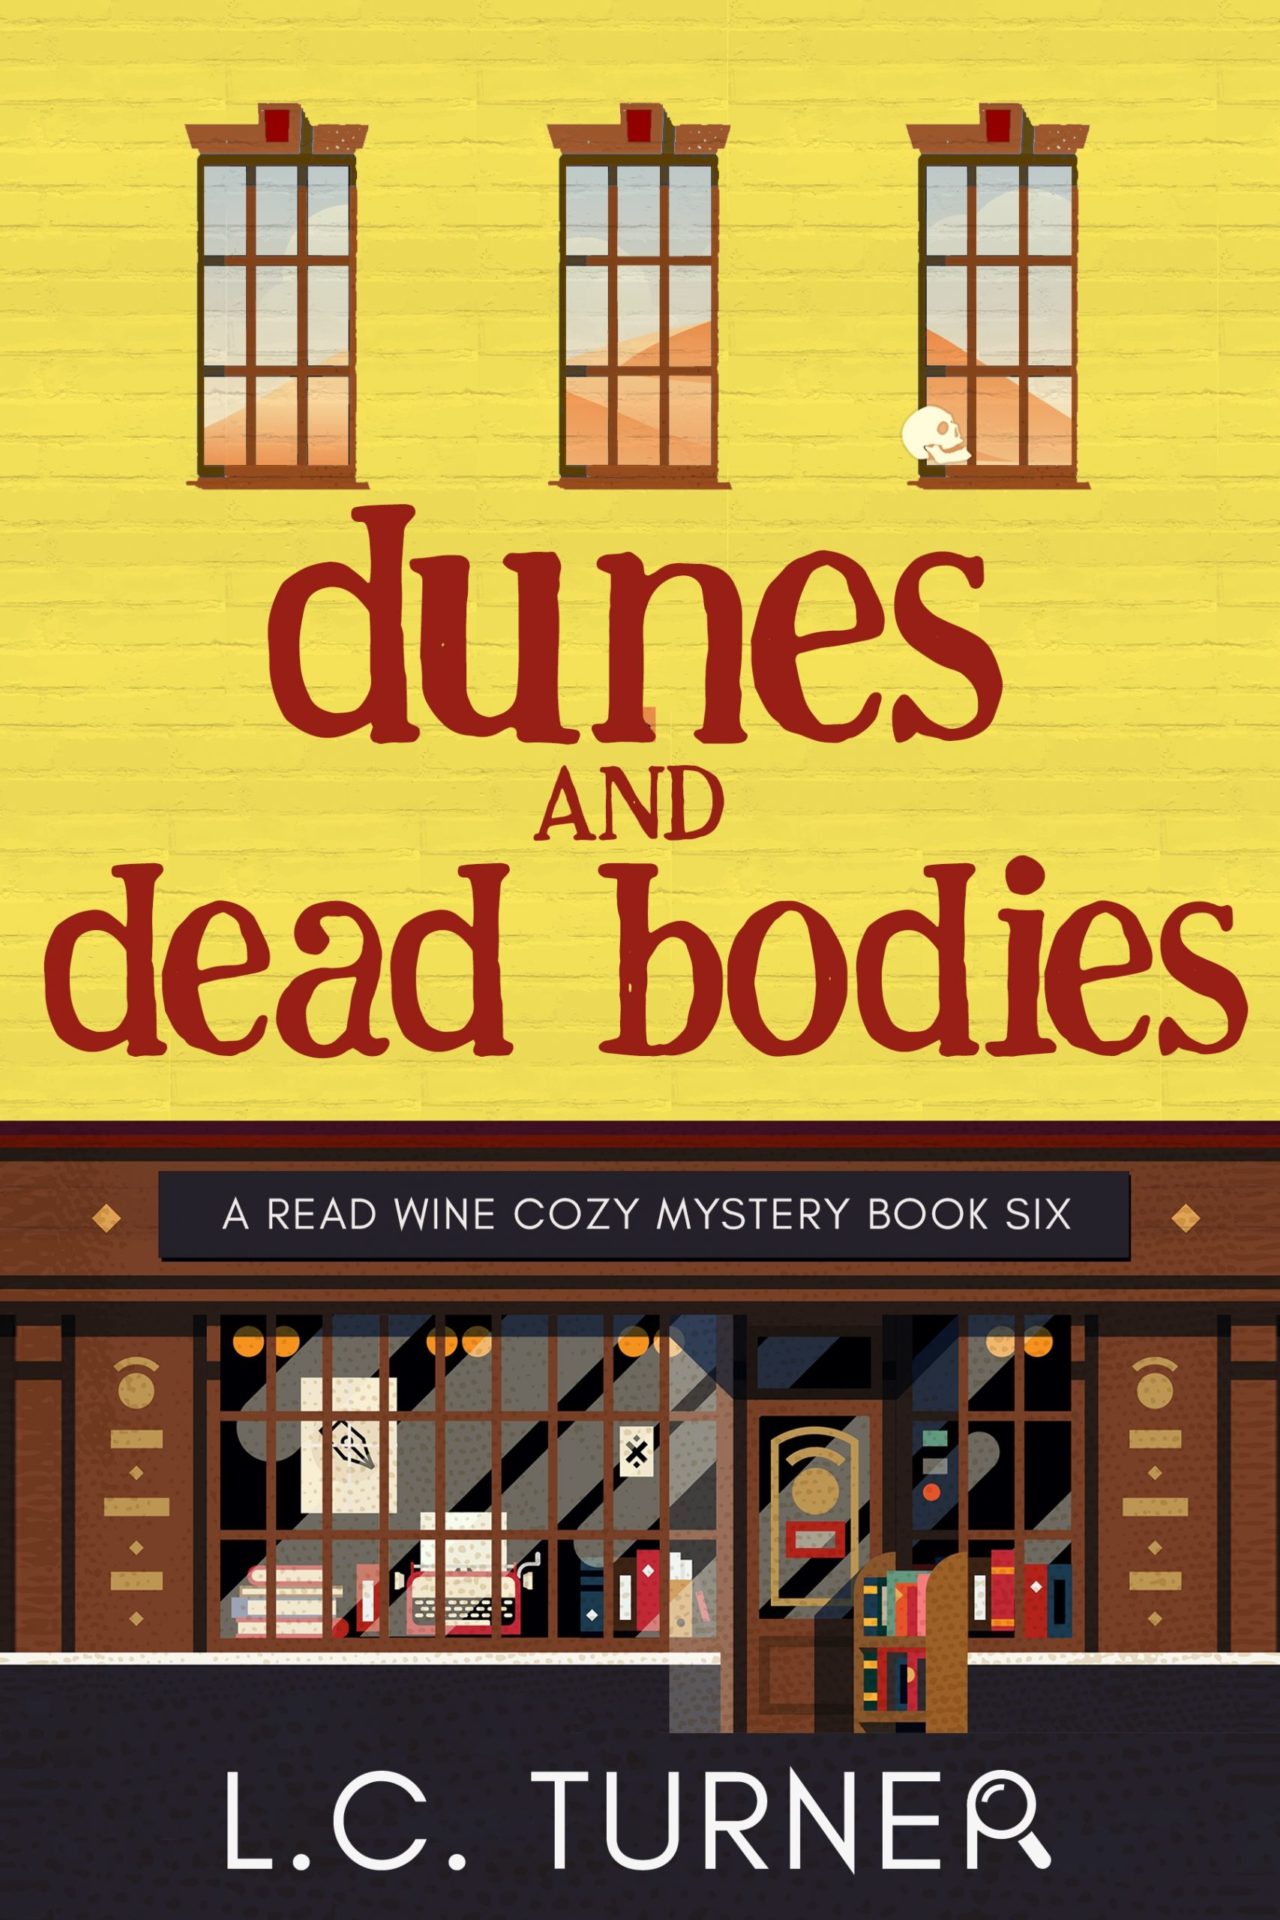 Dunes and Dead Bodies A Read Wine Bookstore Cozy Mystery Book 6